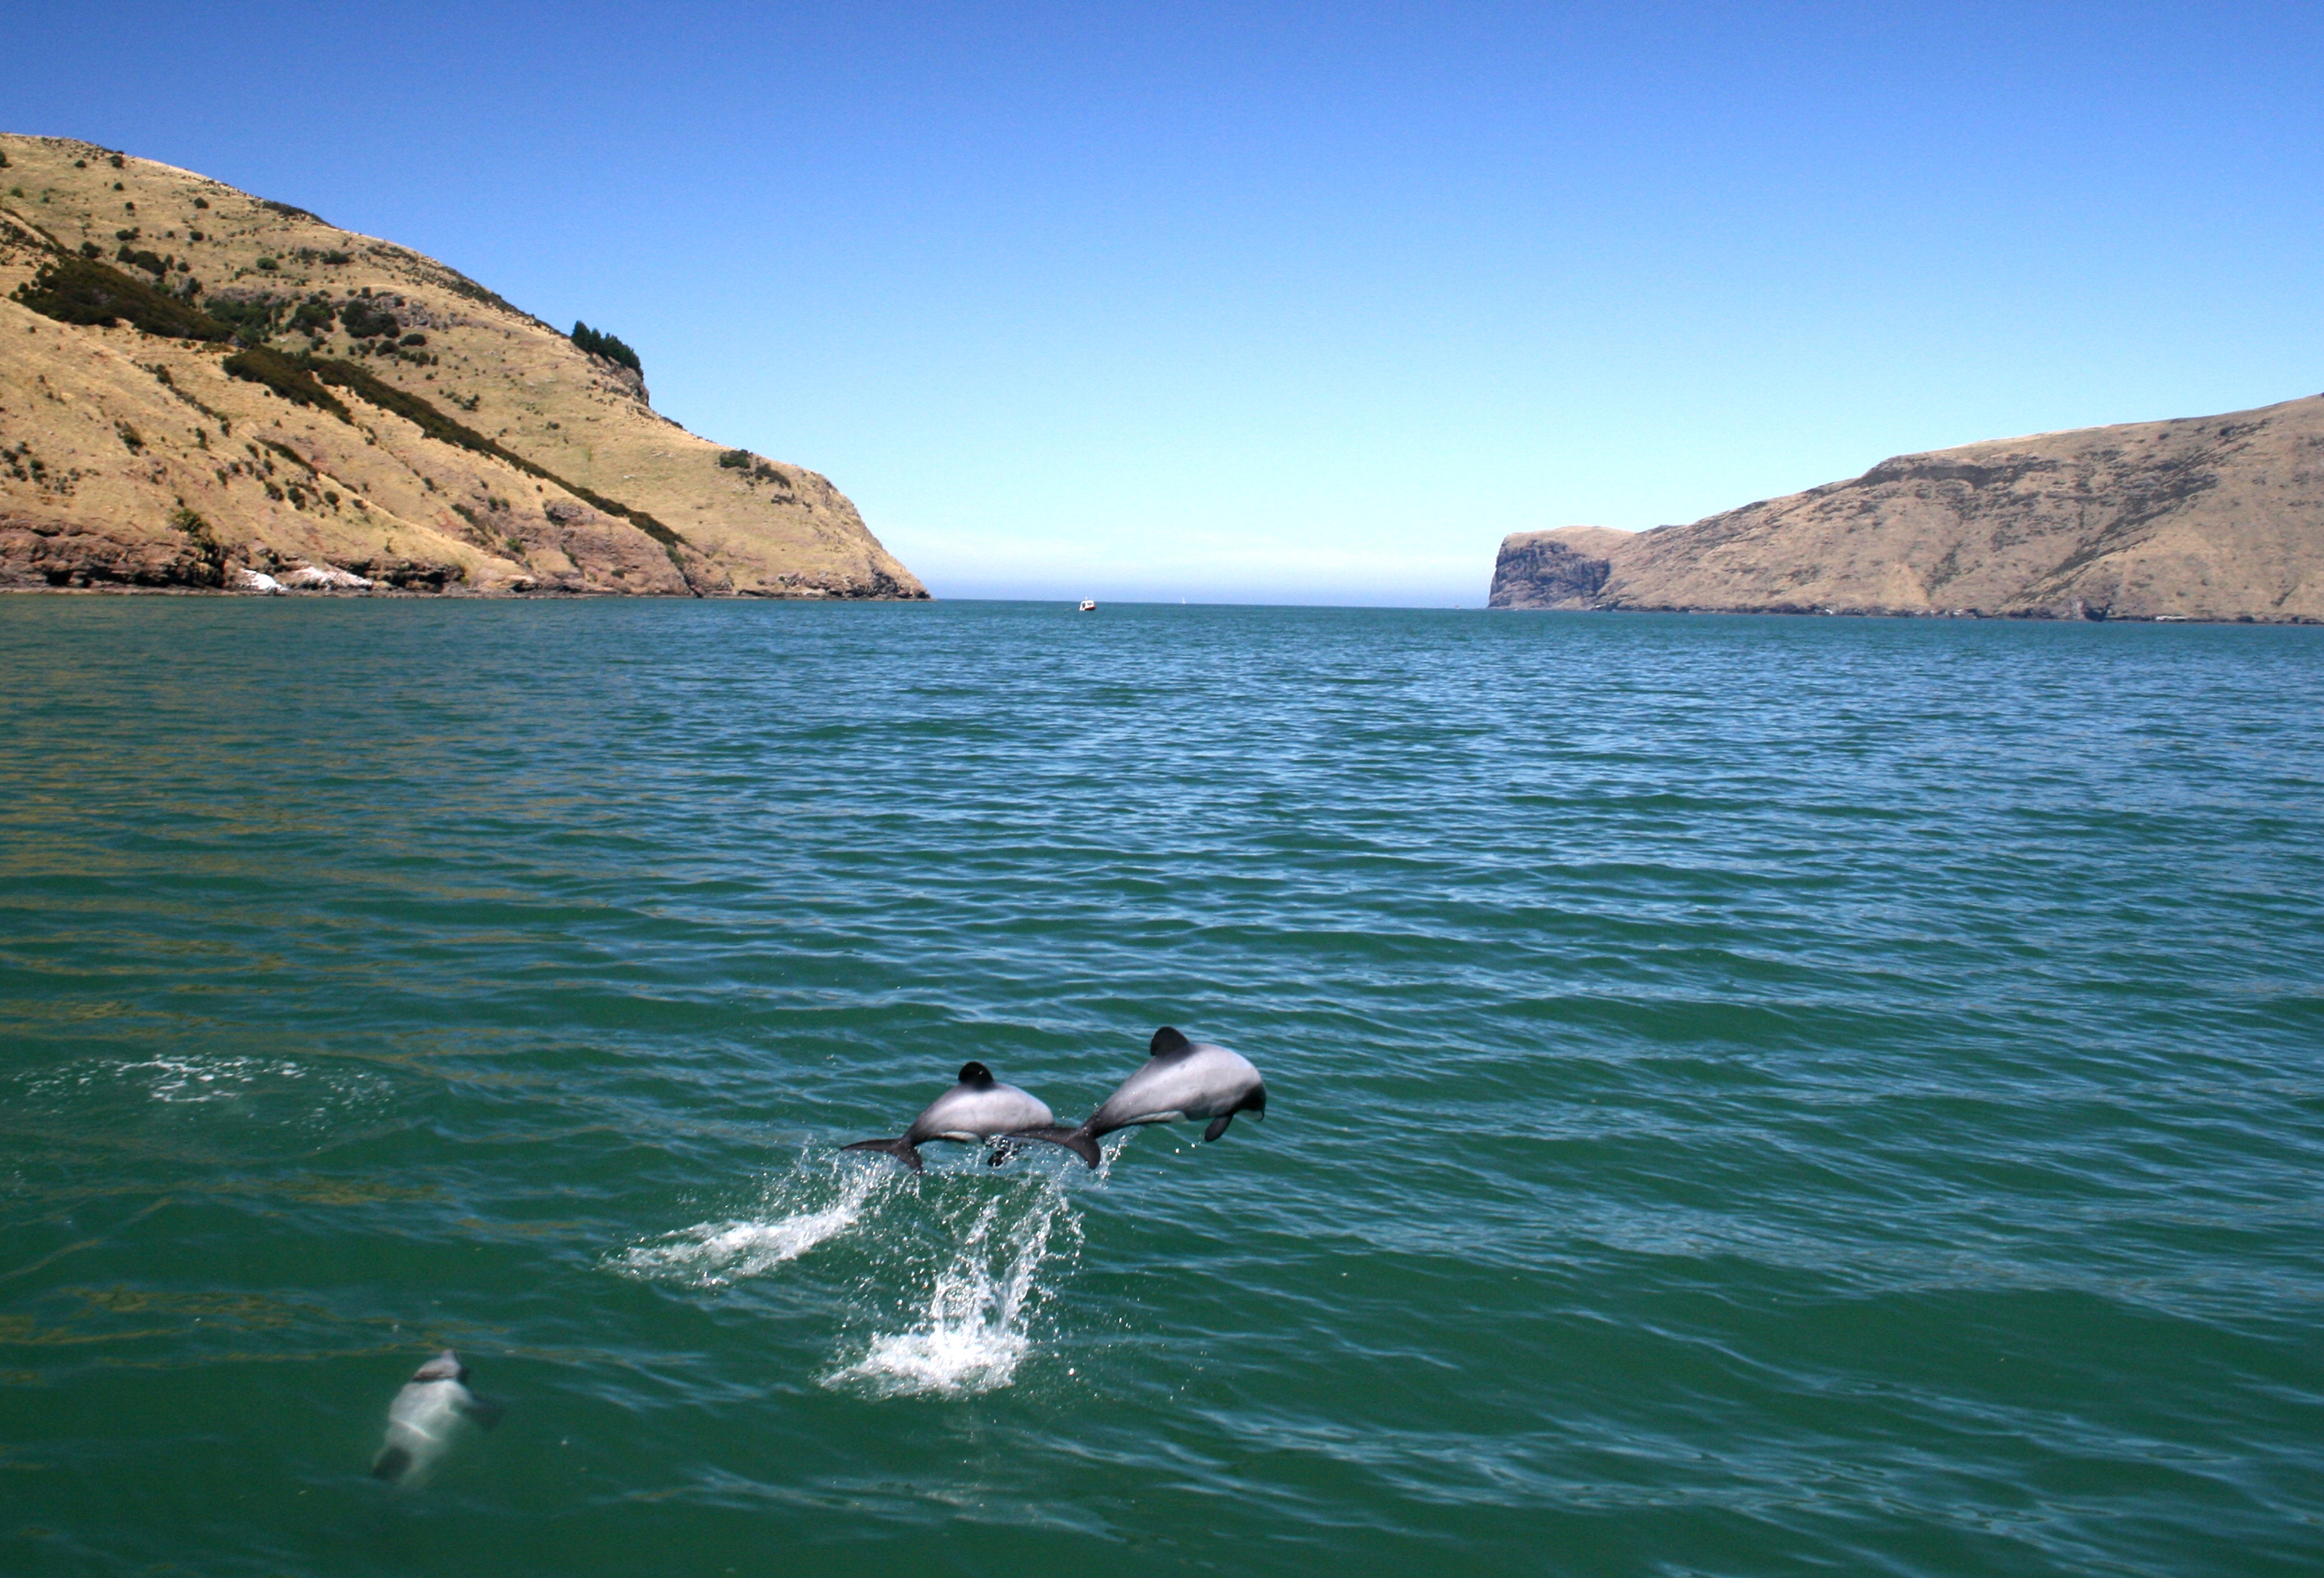 Significant victory in fight to save native New Zealand dolphins